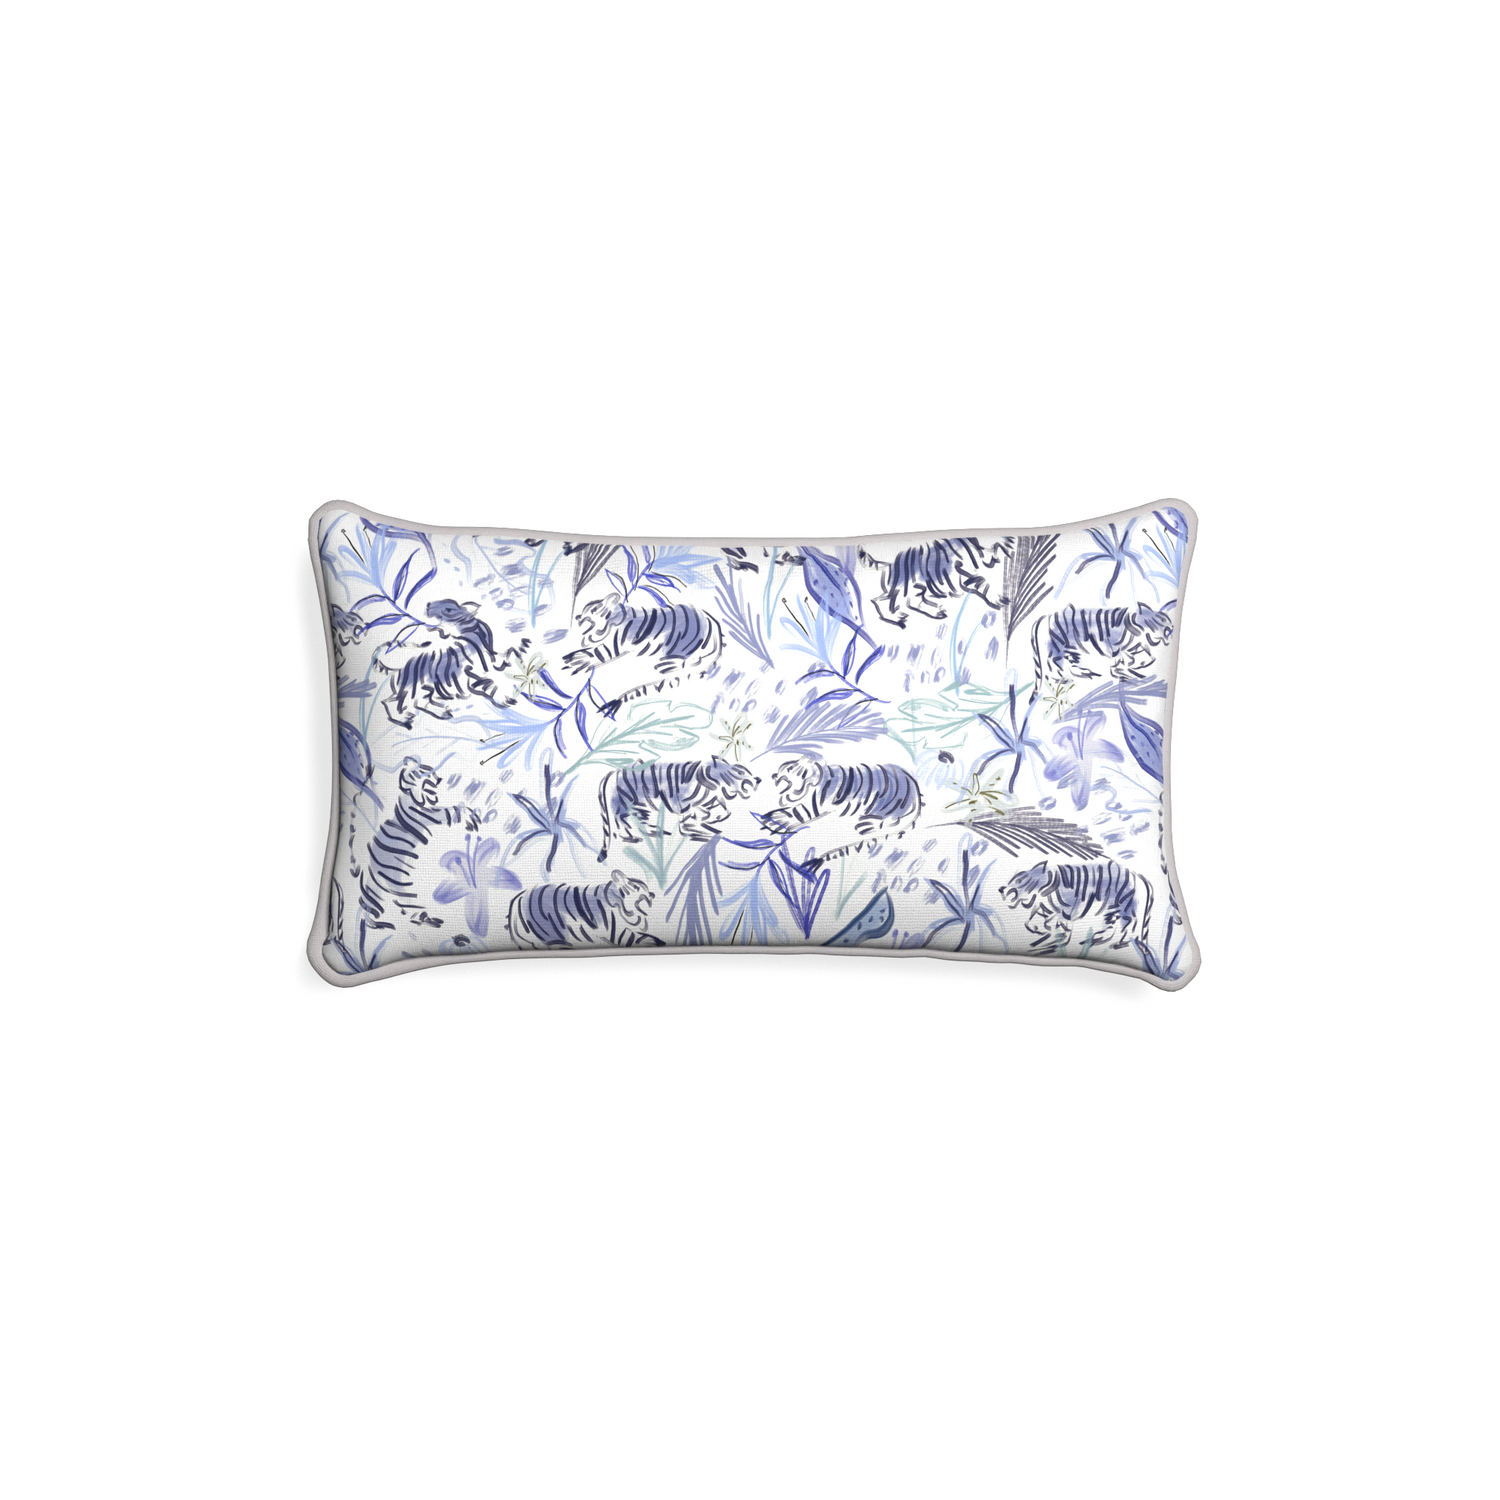 Petite-lumbar frida blue custom blue with intricate tiger designpillow with pebble piping on white background